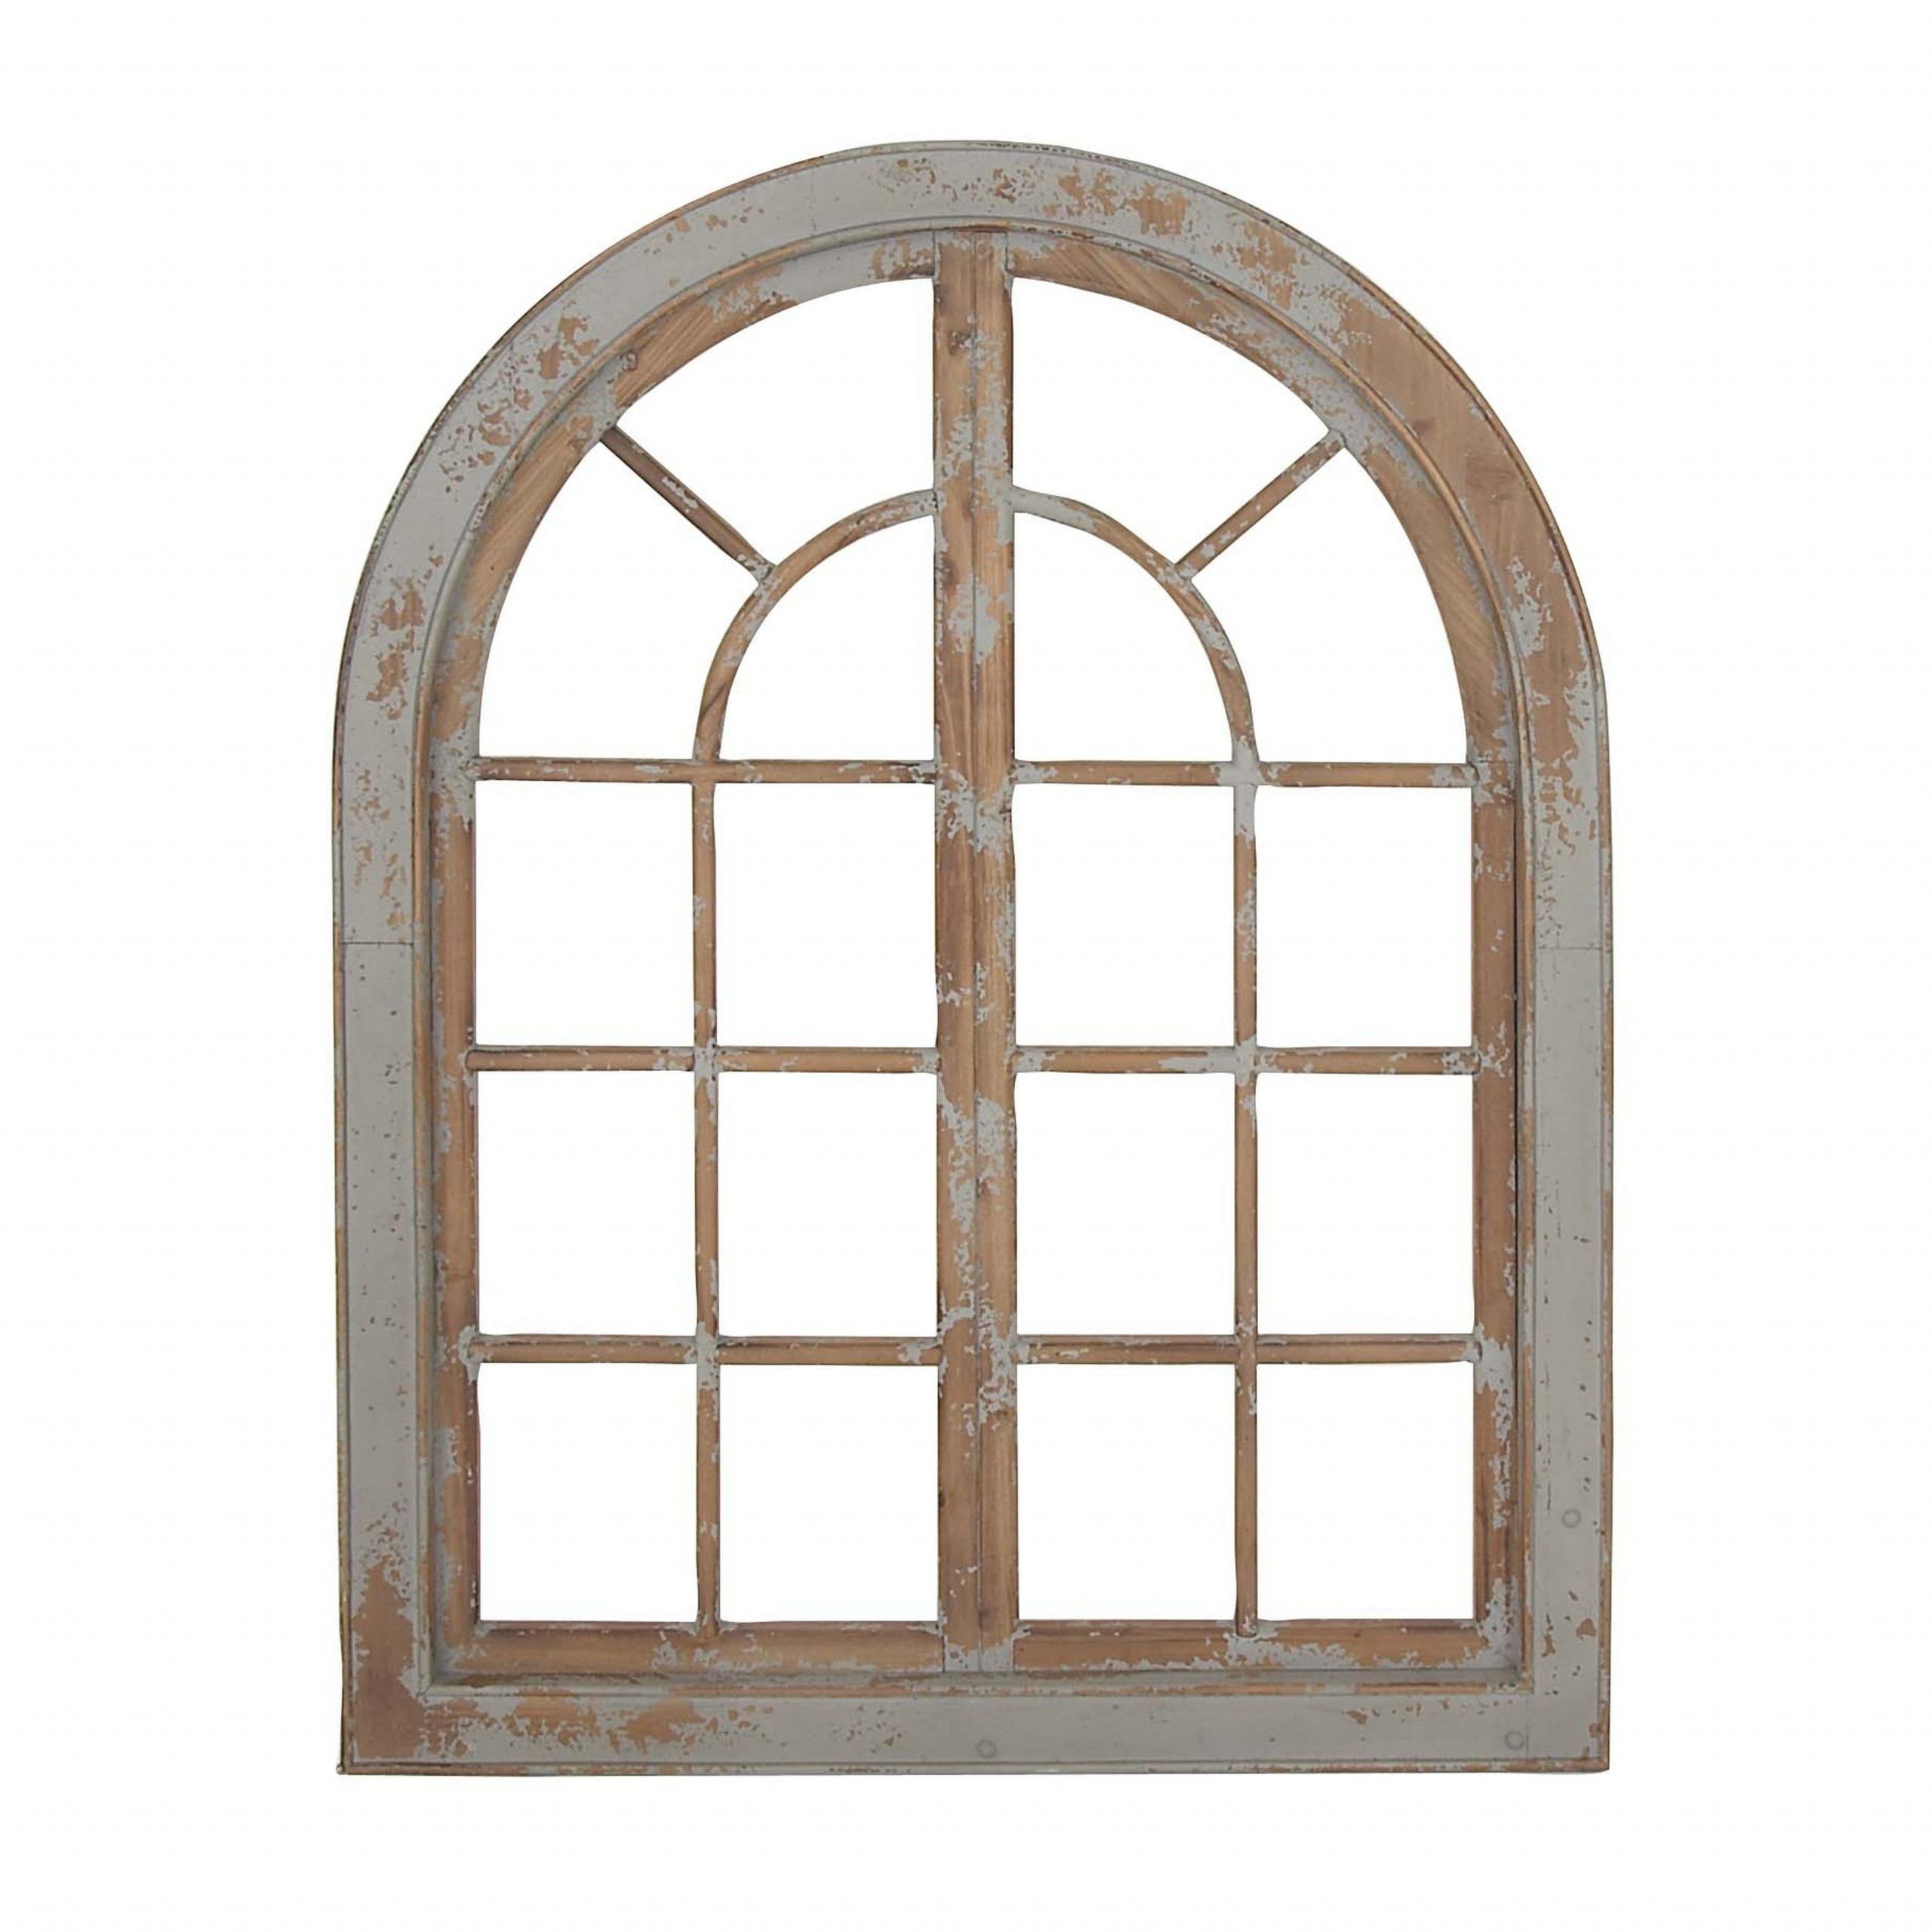 2017 Arched Metal Wall Art Regarding Distressed Rustic Southwest Arched Brown Wood Metal Wall Art Panel (View 13 of 15)